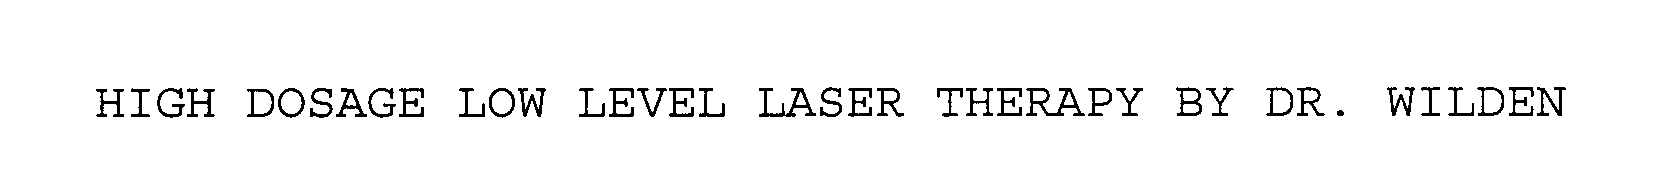  HIGH DOSAGE LOW LEVEL LASER THERAPY BY DR. WILDEN